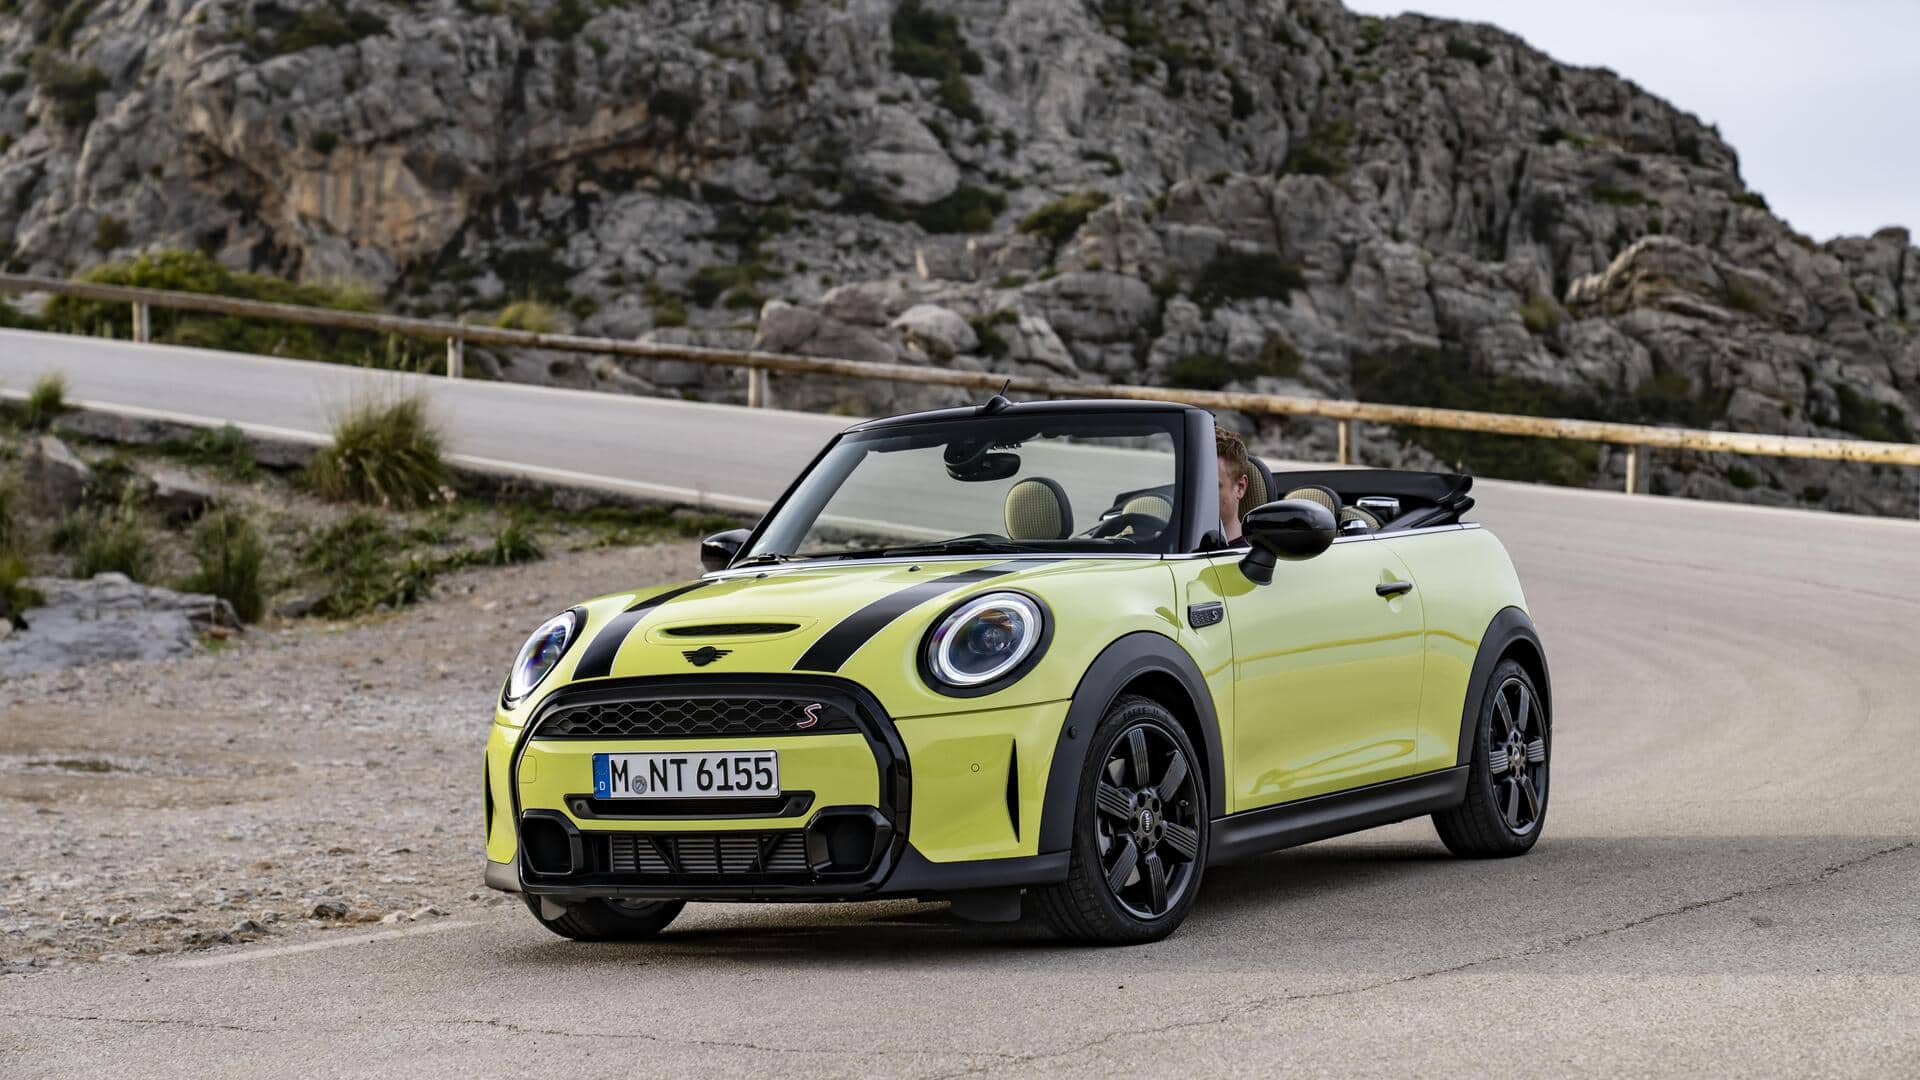 New-generation MINI Cooper in the works: What to expect